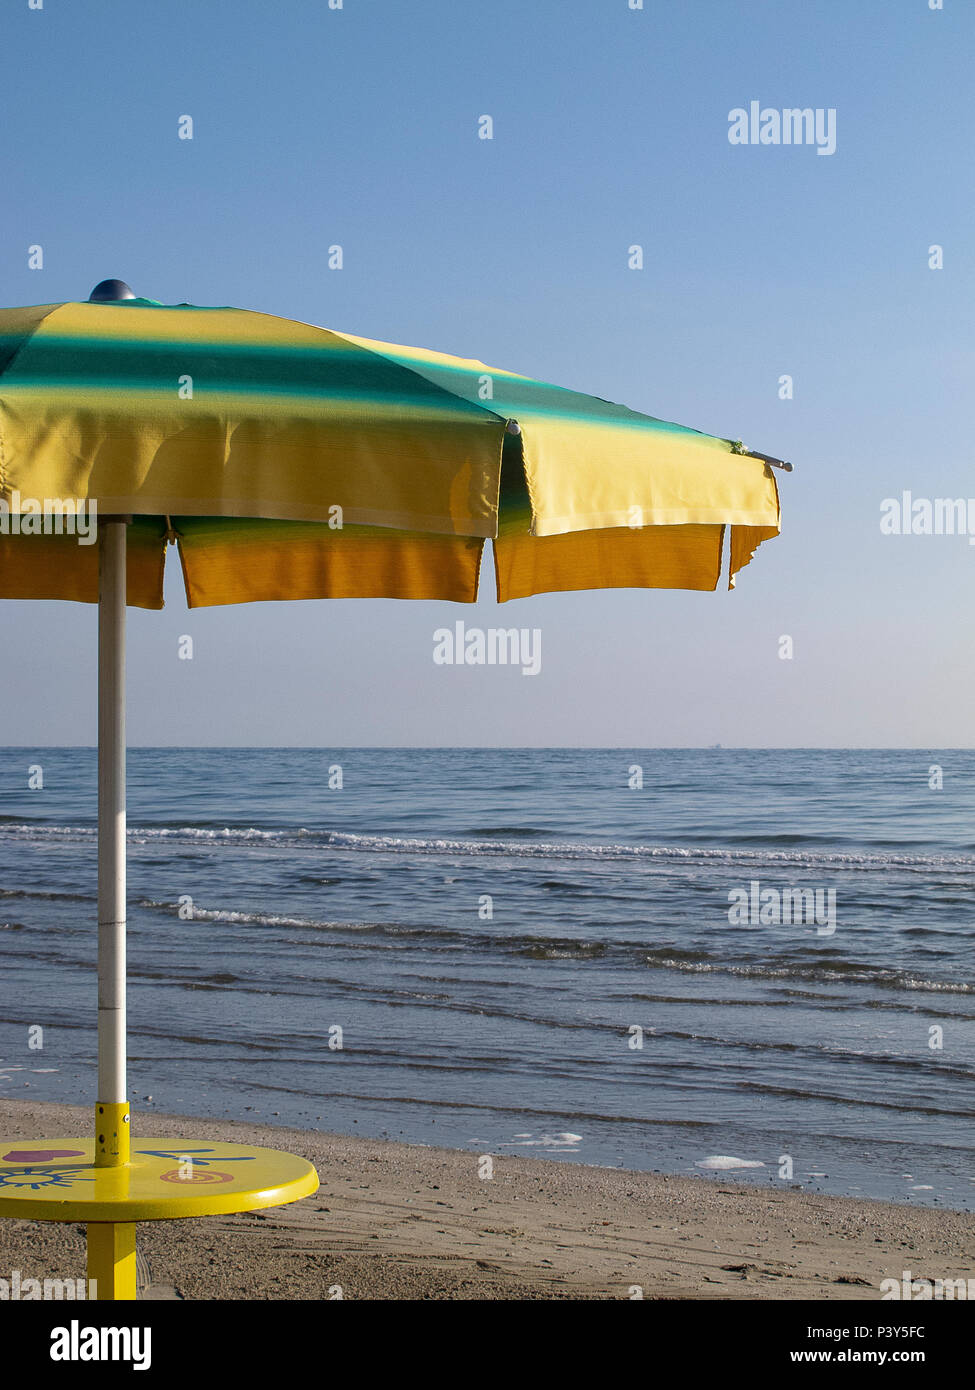 Beach umbrella yellow and green, with the background of the sea and blue sky Stock Photo